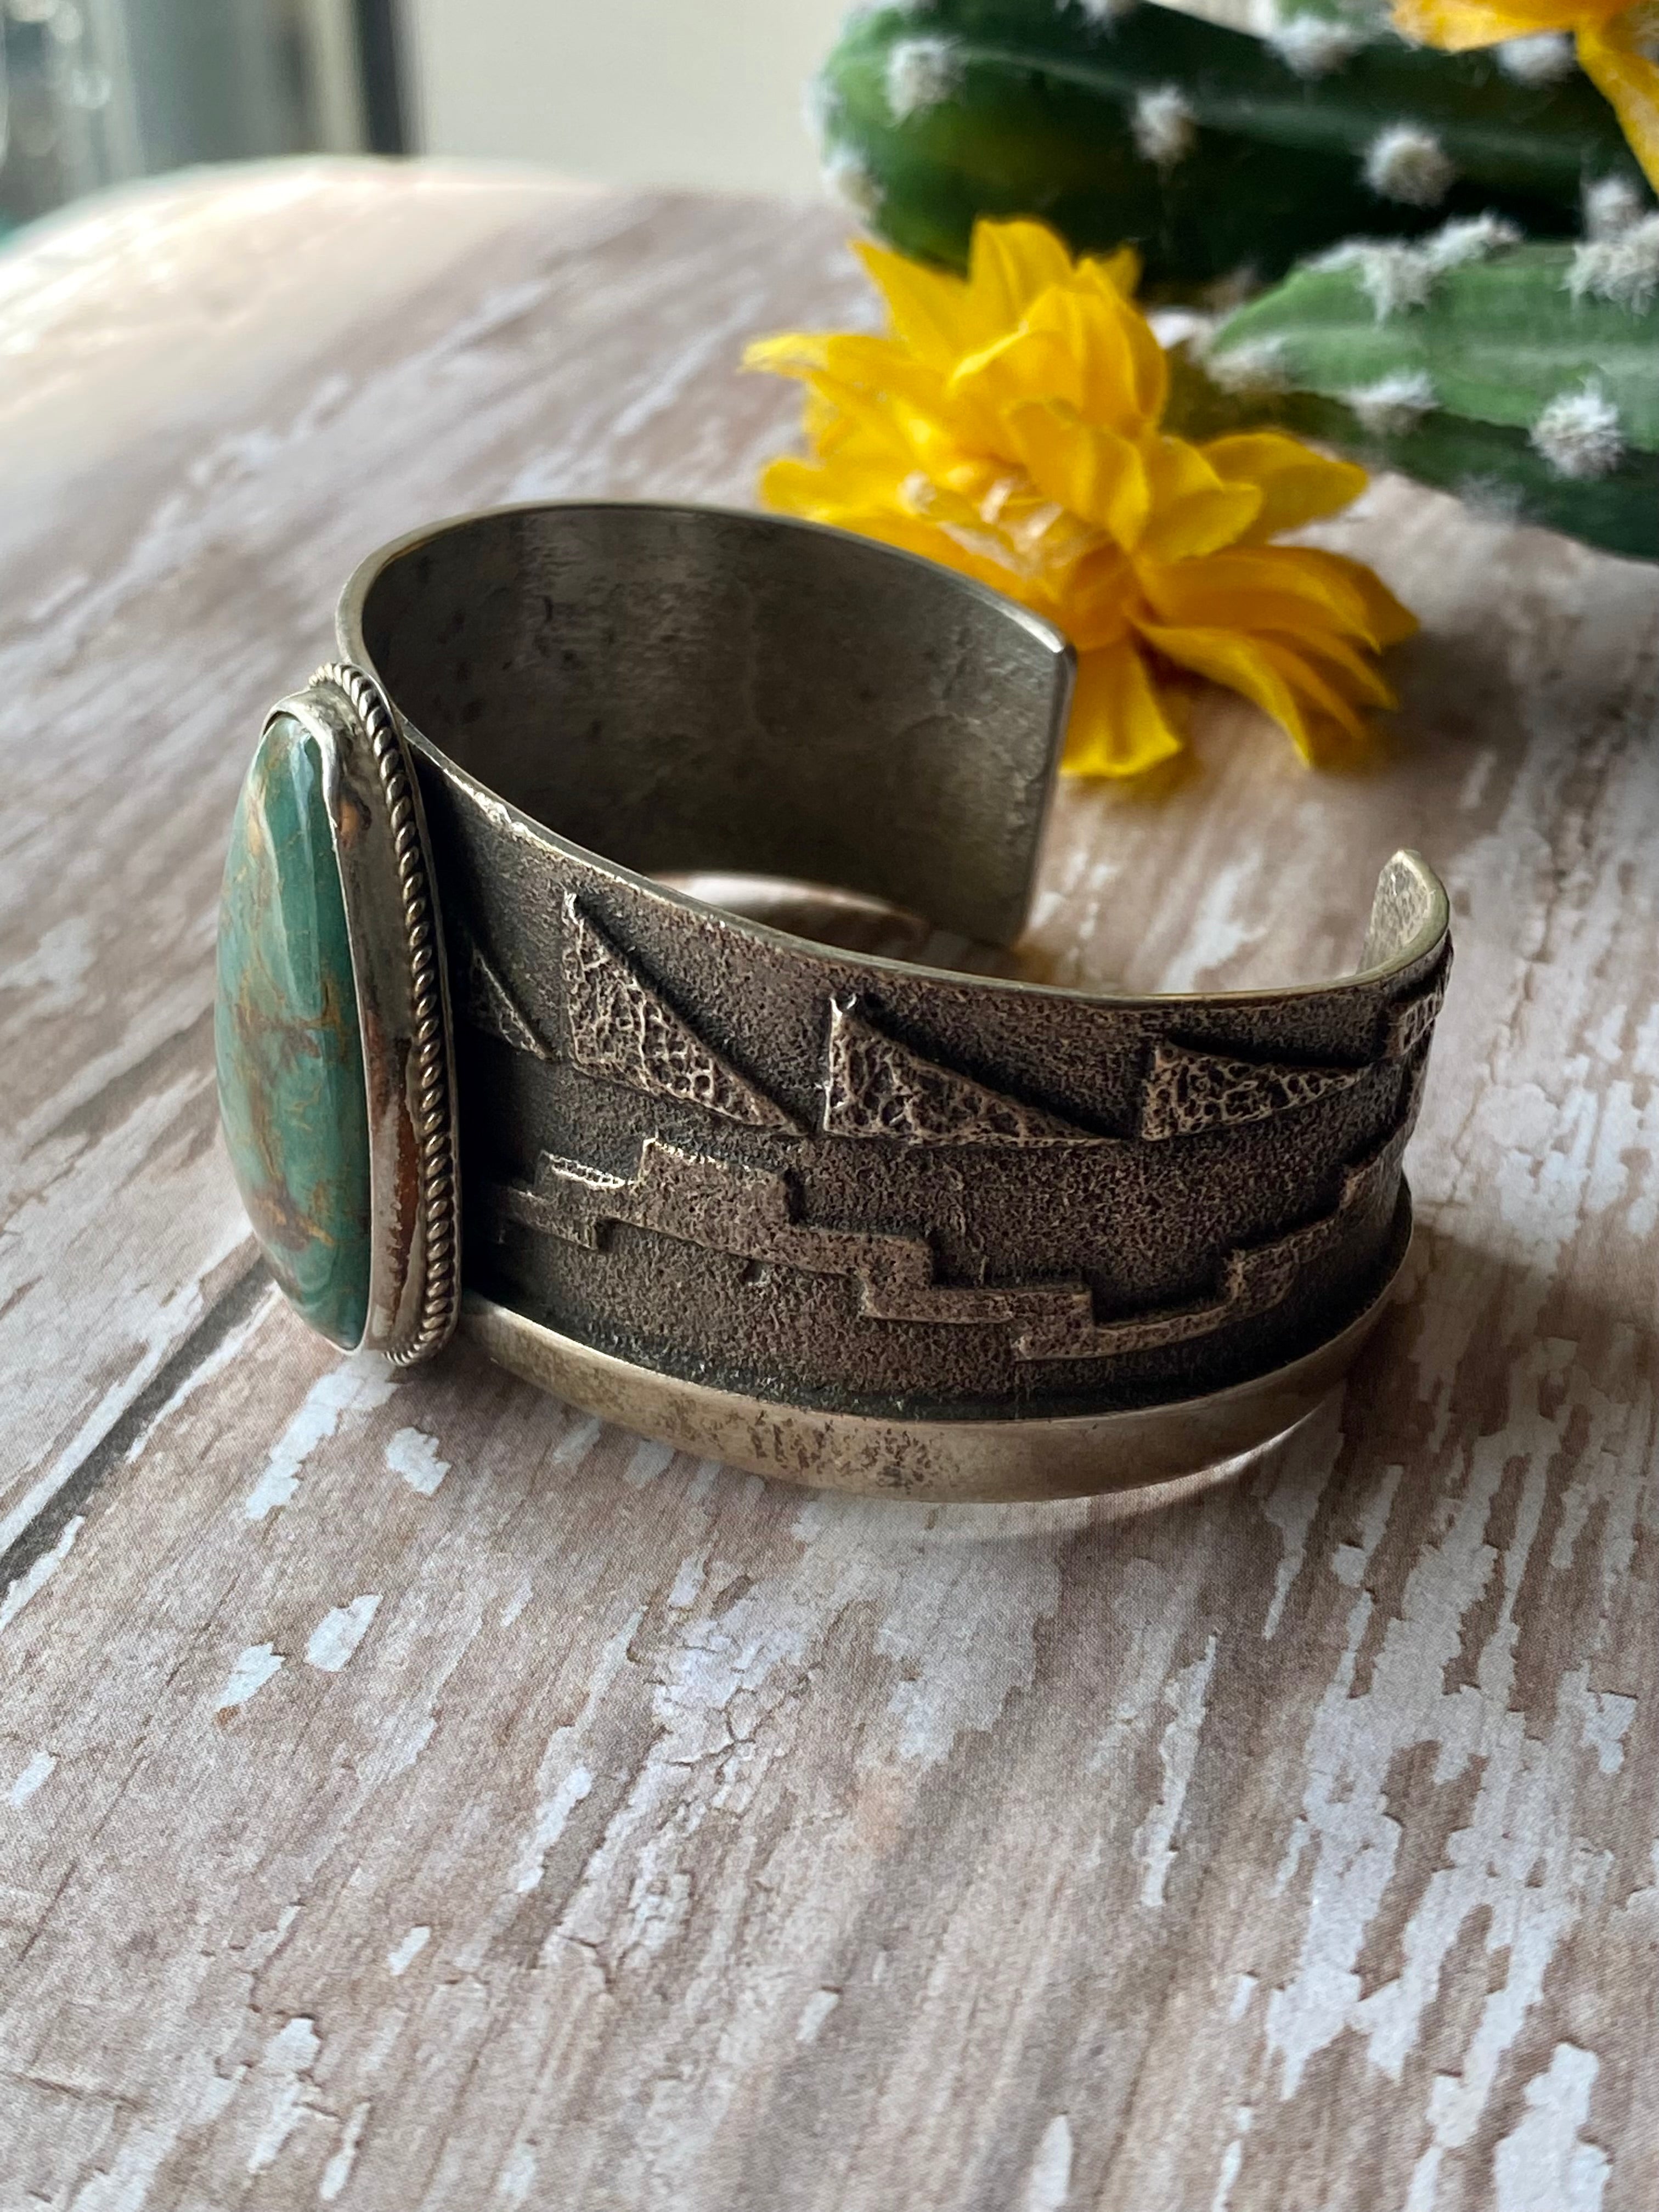 Vintage Navajo Made Royston Turquoise & Sterling Silver Cuff Bracelet